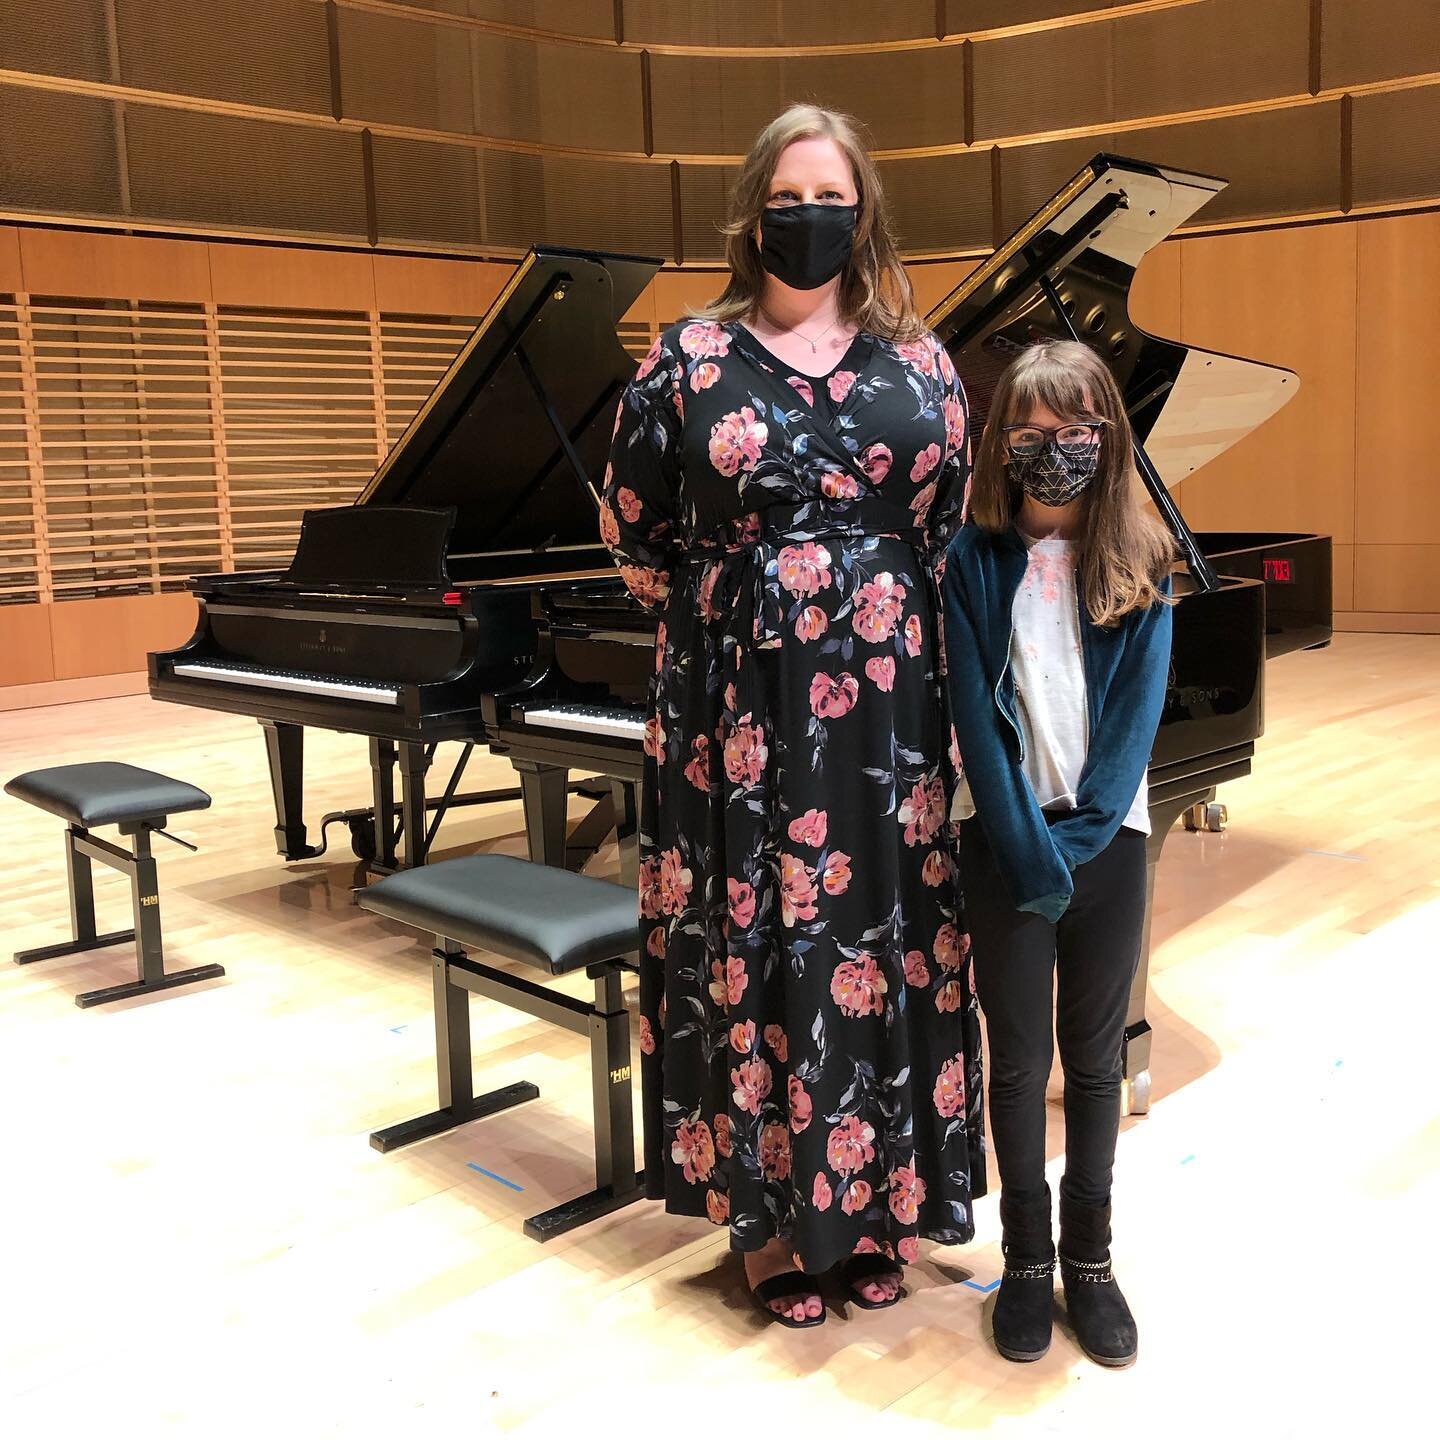 When a student comes to your piano recital 🥰 So sweet! Thank you for coming, Lily! 🎶💗🎹 
&mdash;&mdash;
#piano&nbsp;#pianolife #pianogram #instapianist #pianoplaying #pianogram #classicalpiano&nbsp;#classicalpianist #instaclassical #musiciansofins